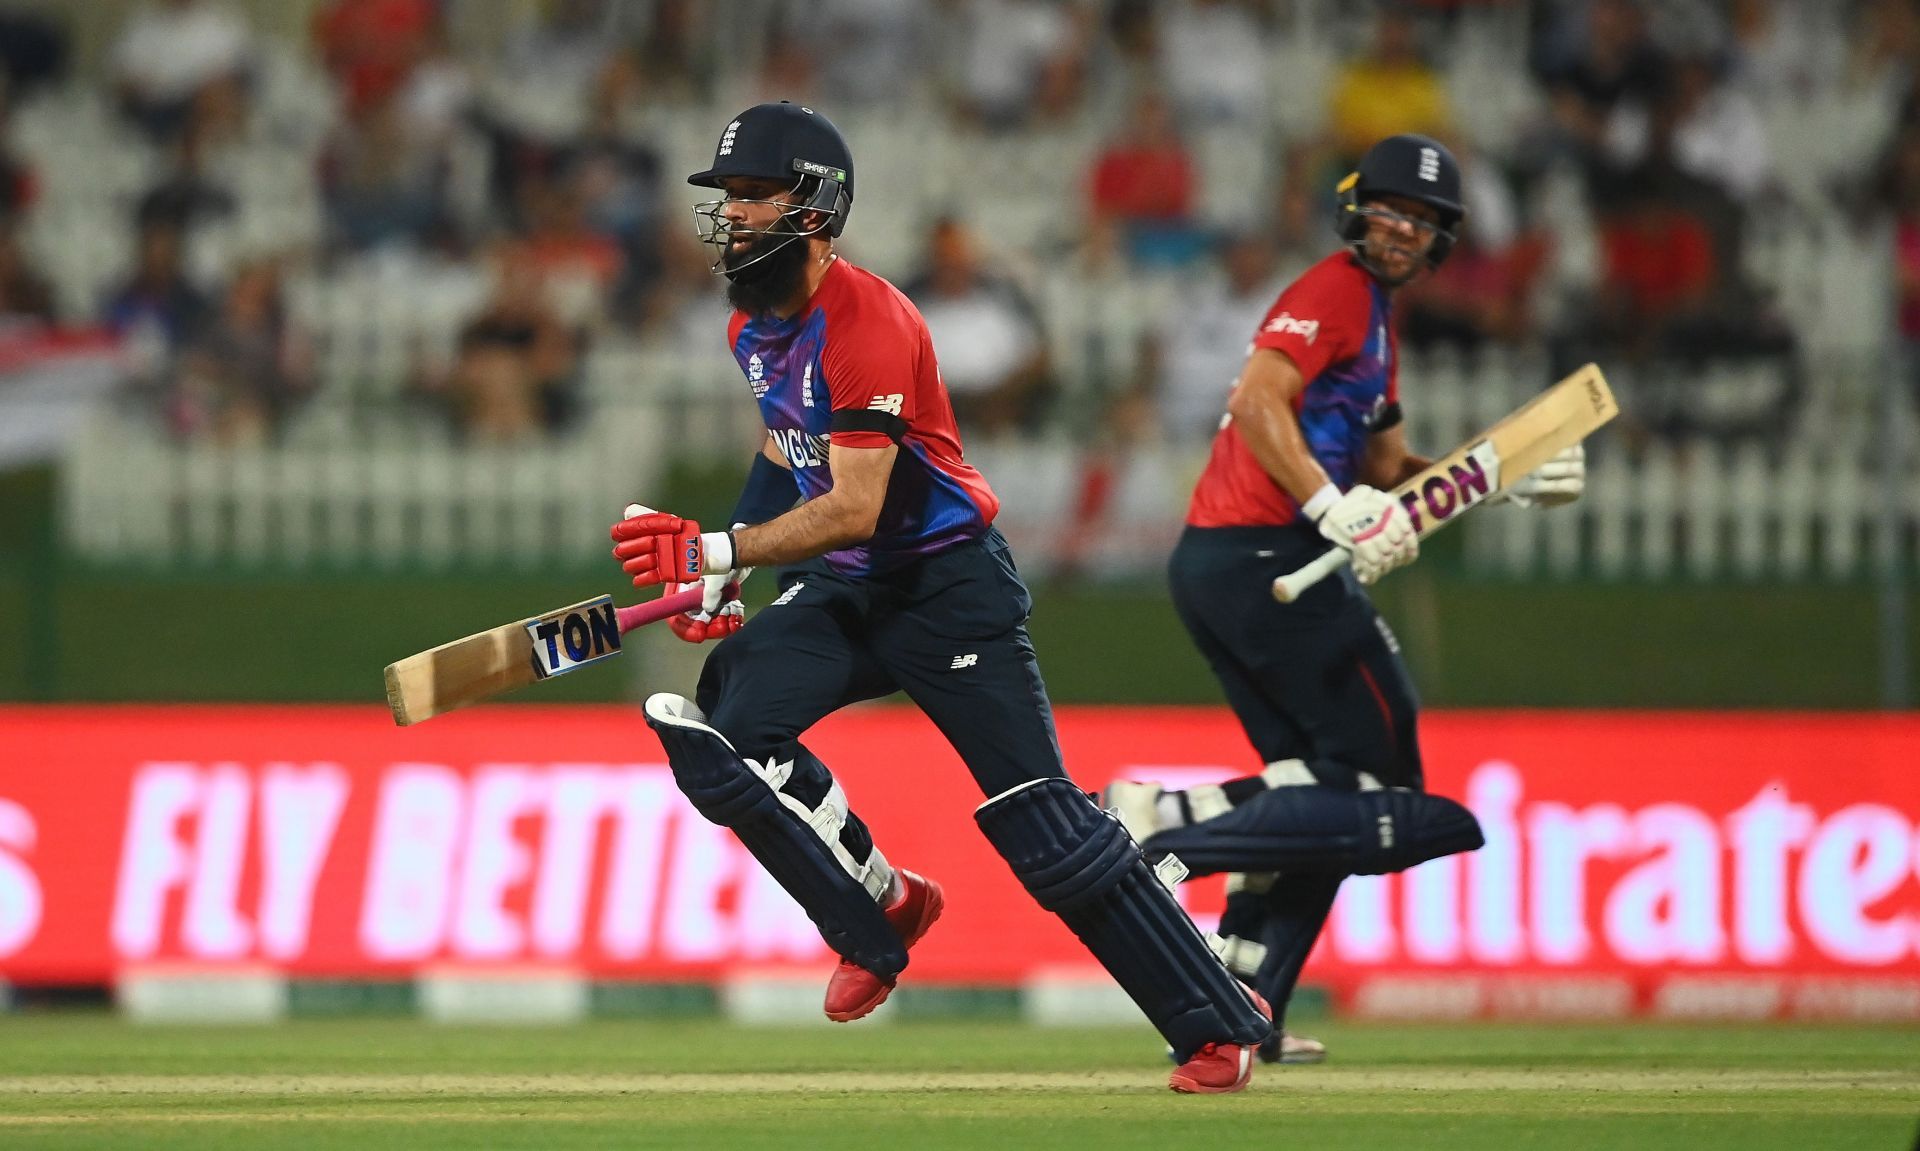 Moeen Ali (L) and Dawid Malan consolidated the England innings in the middle overs